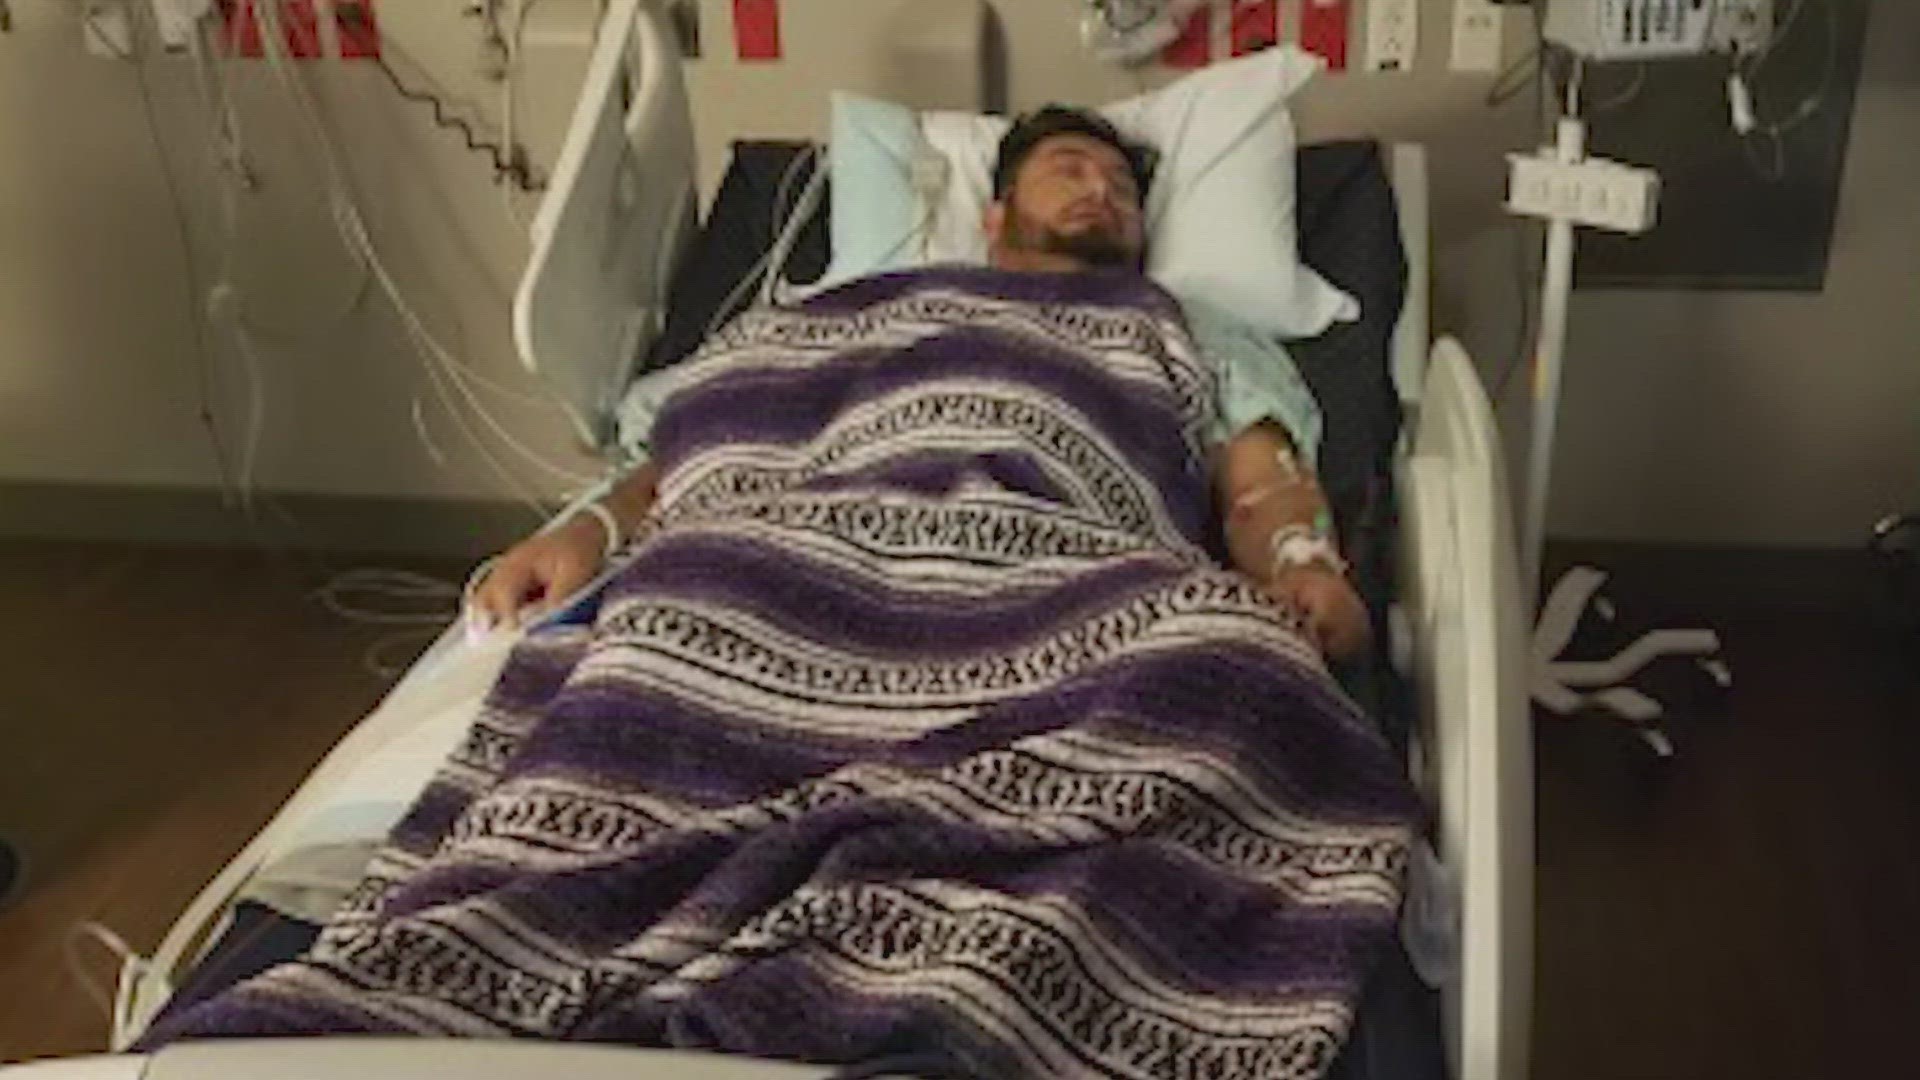 Sebastian Avila has an injured liver and needed part of his lung removed as a result of the gunshot wounds.